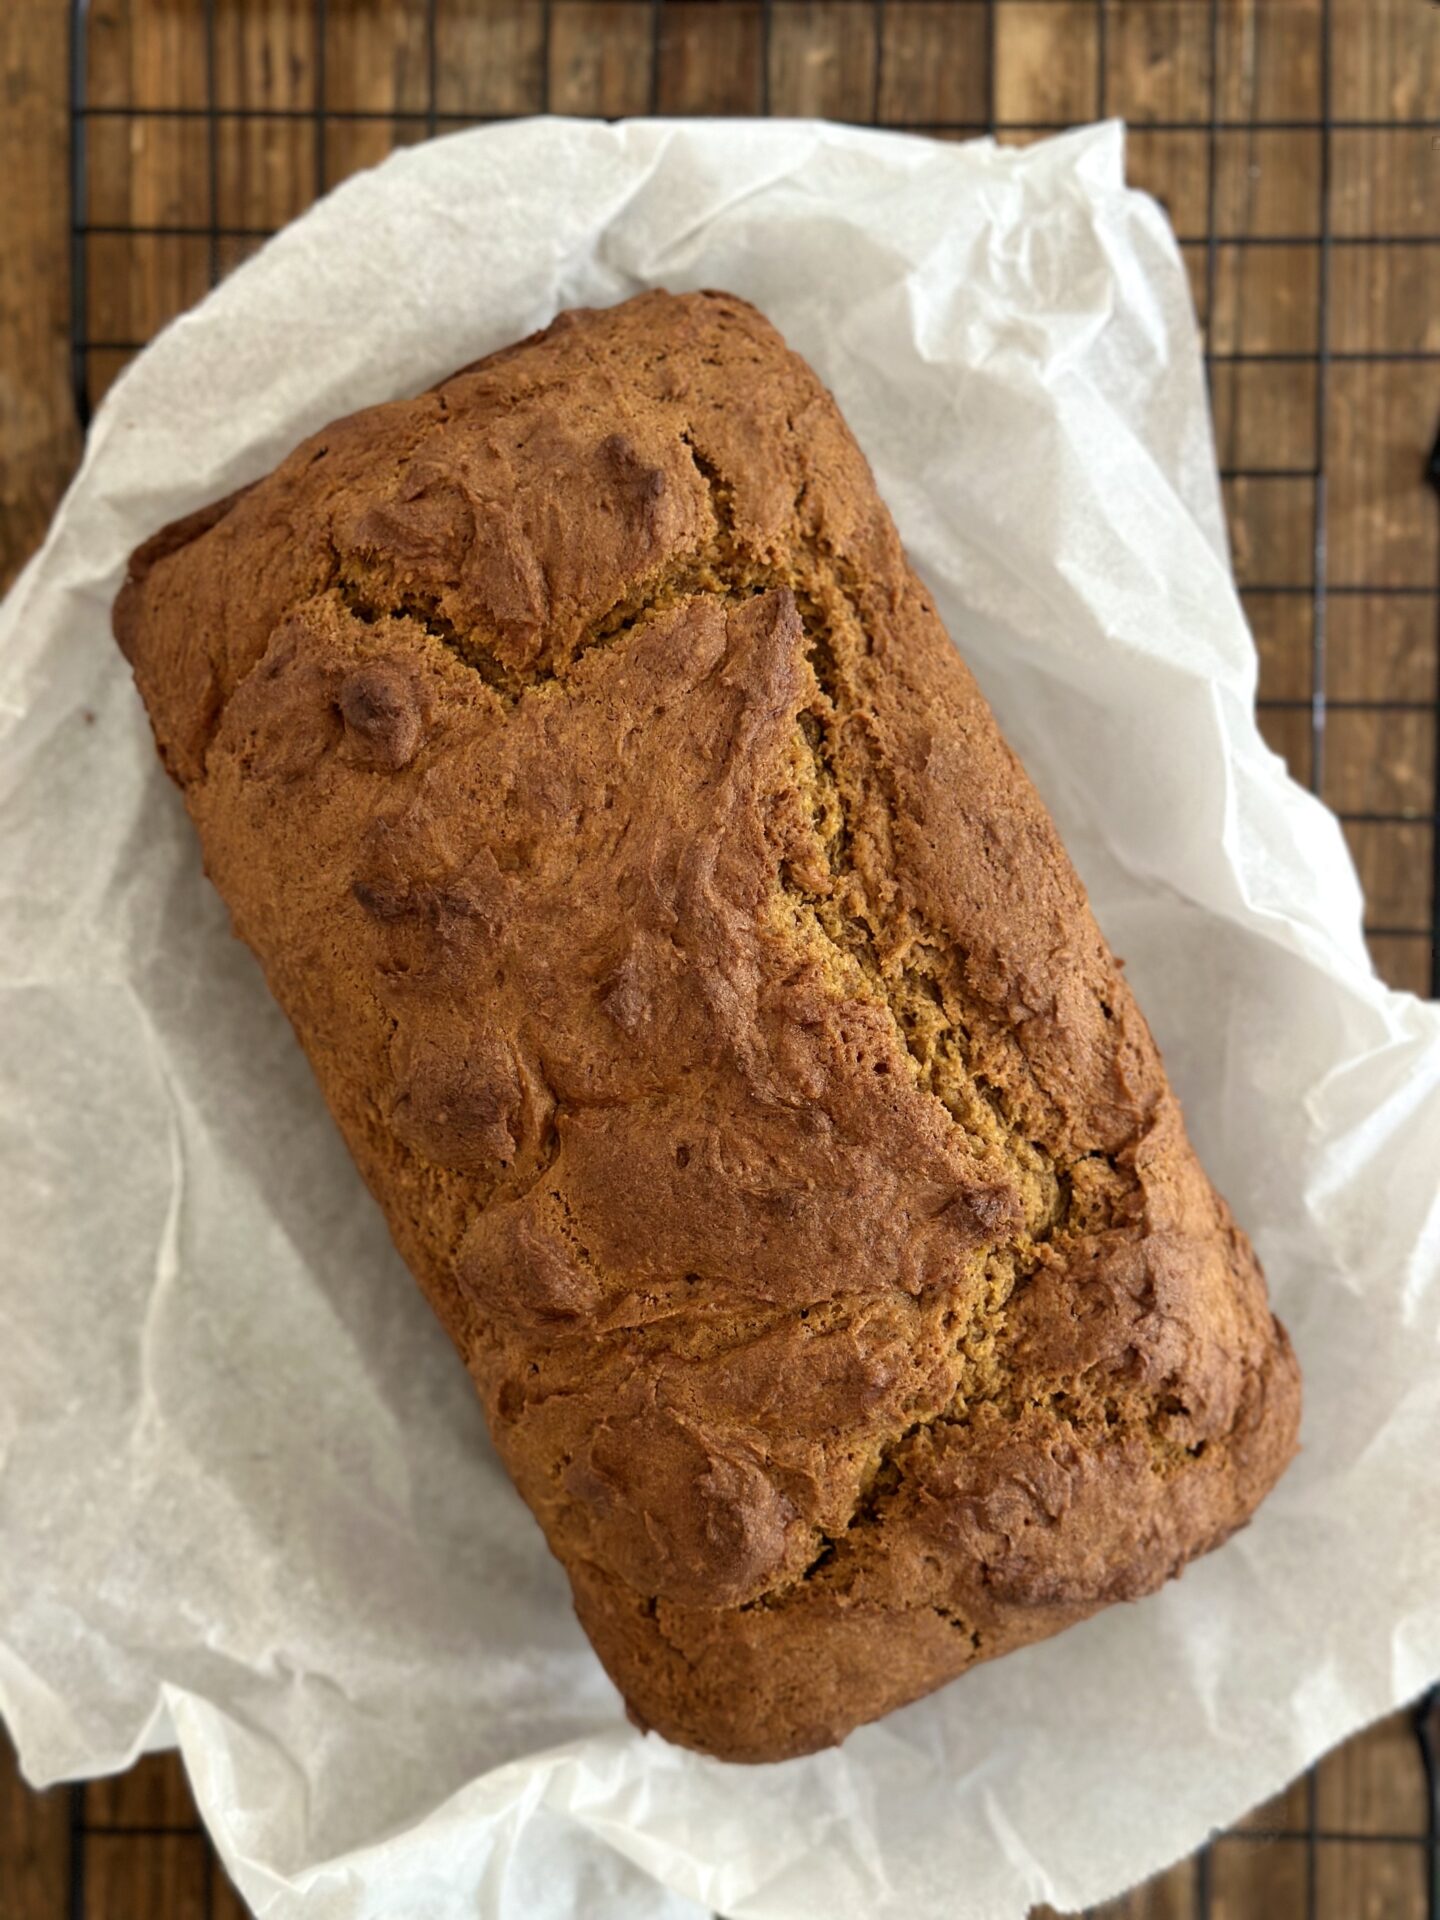 A golden loaf of pumpkin bread fresh from the oven is cooling on a parchment paper lined rack